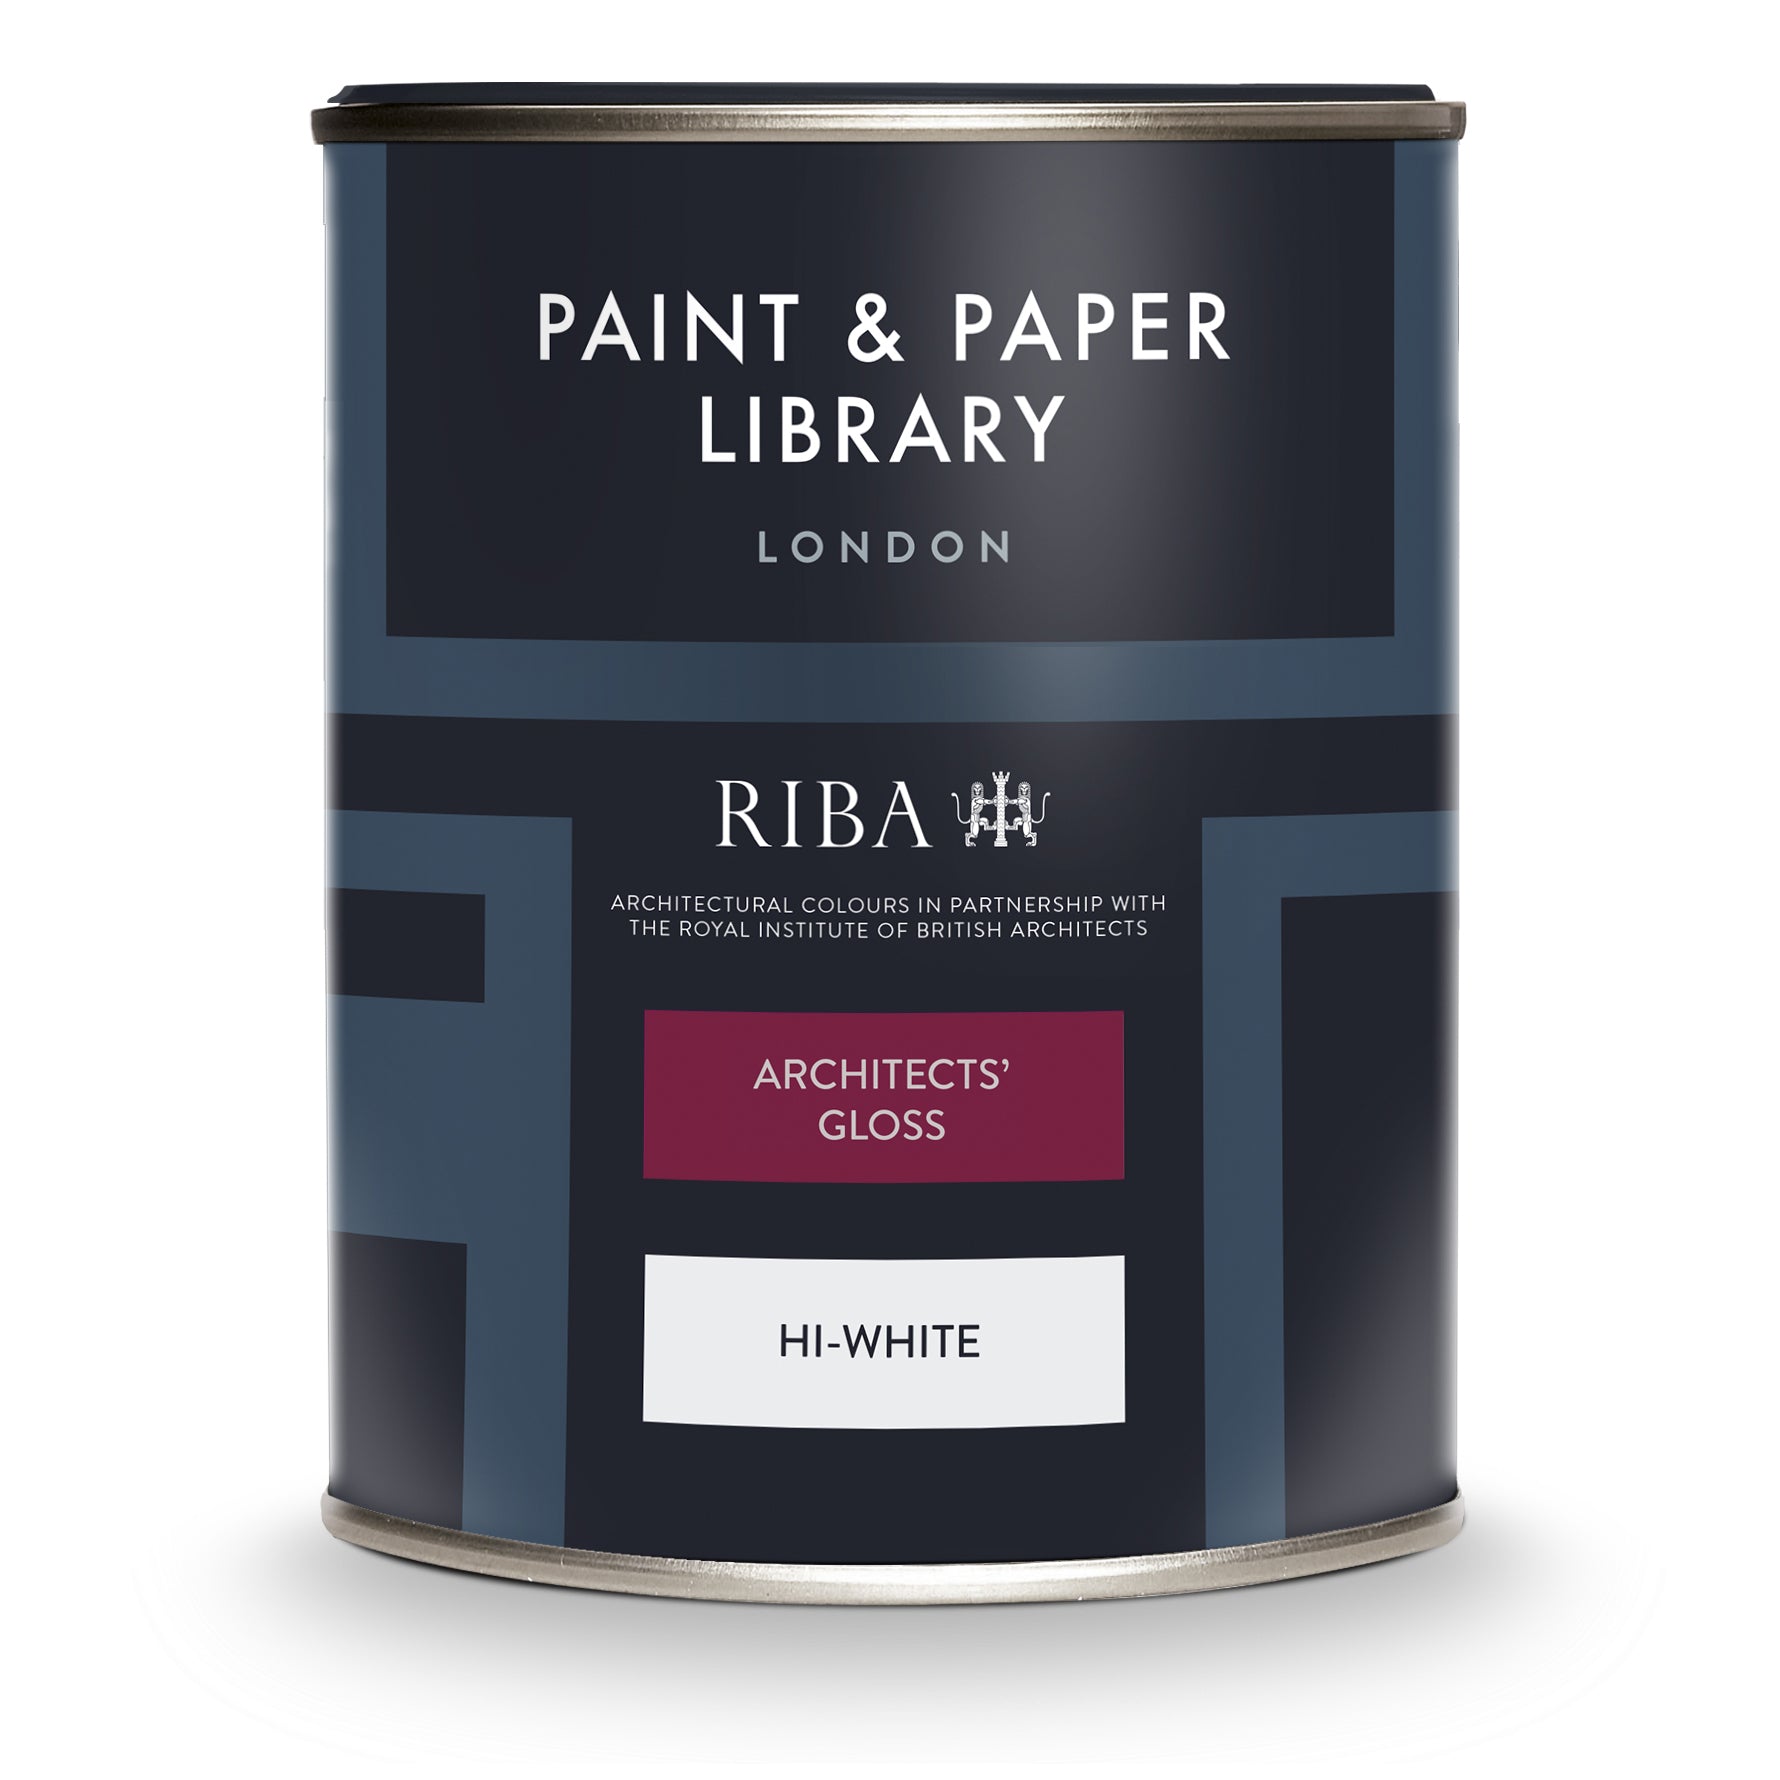 Paint & Paper Library Architects Gloss 750ml